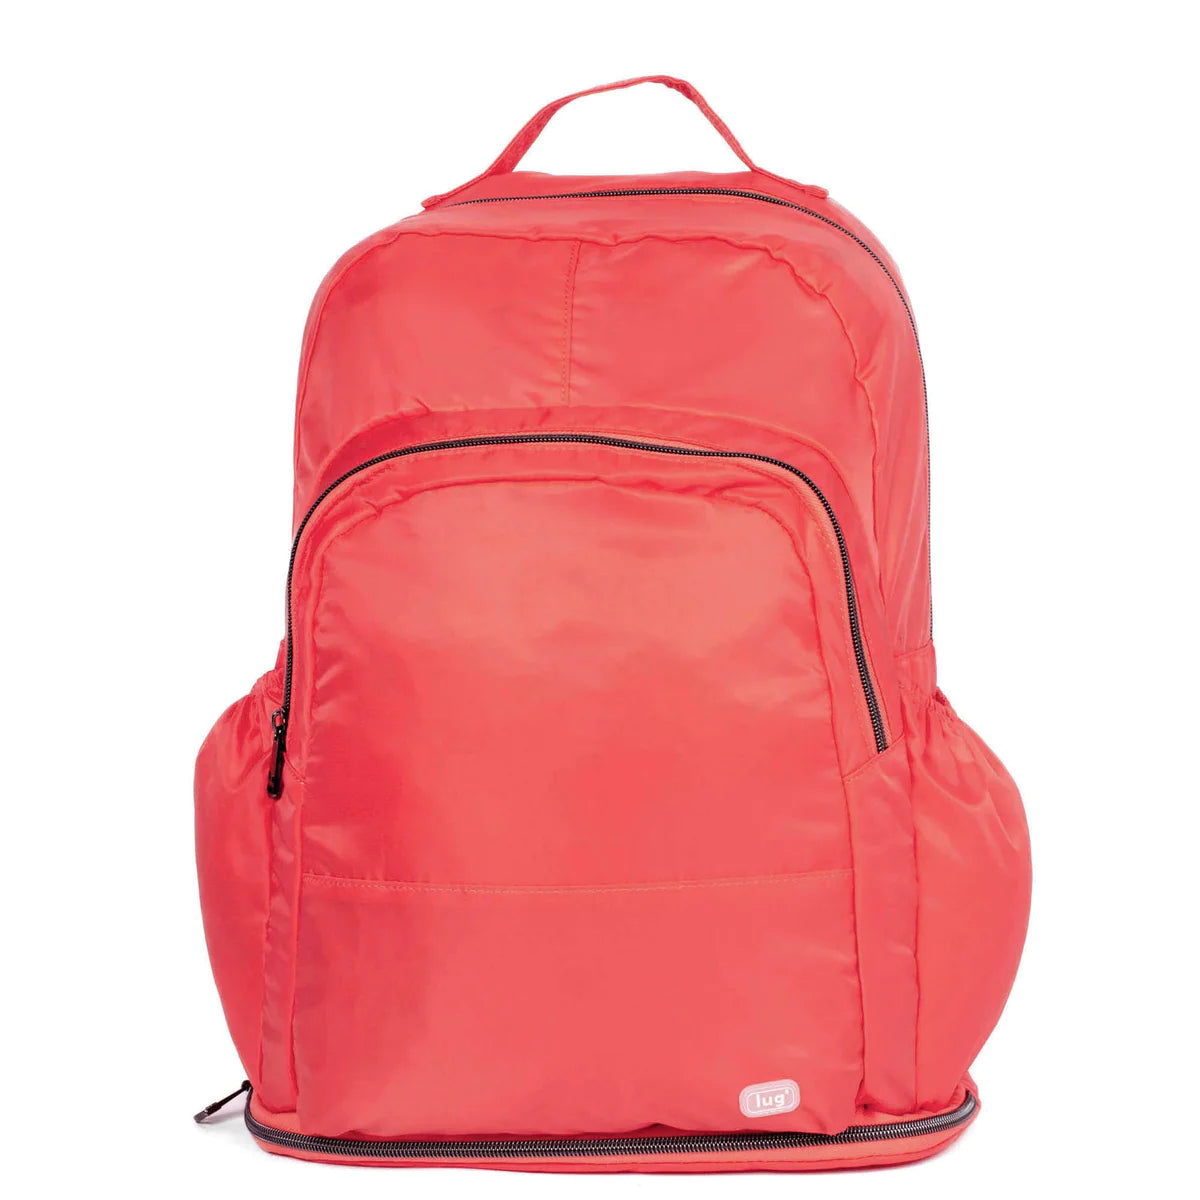 Echo 2 Packable Backpack- Fruit Punch